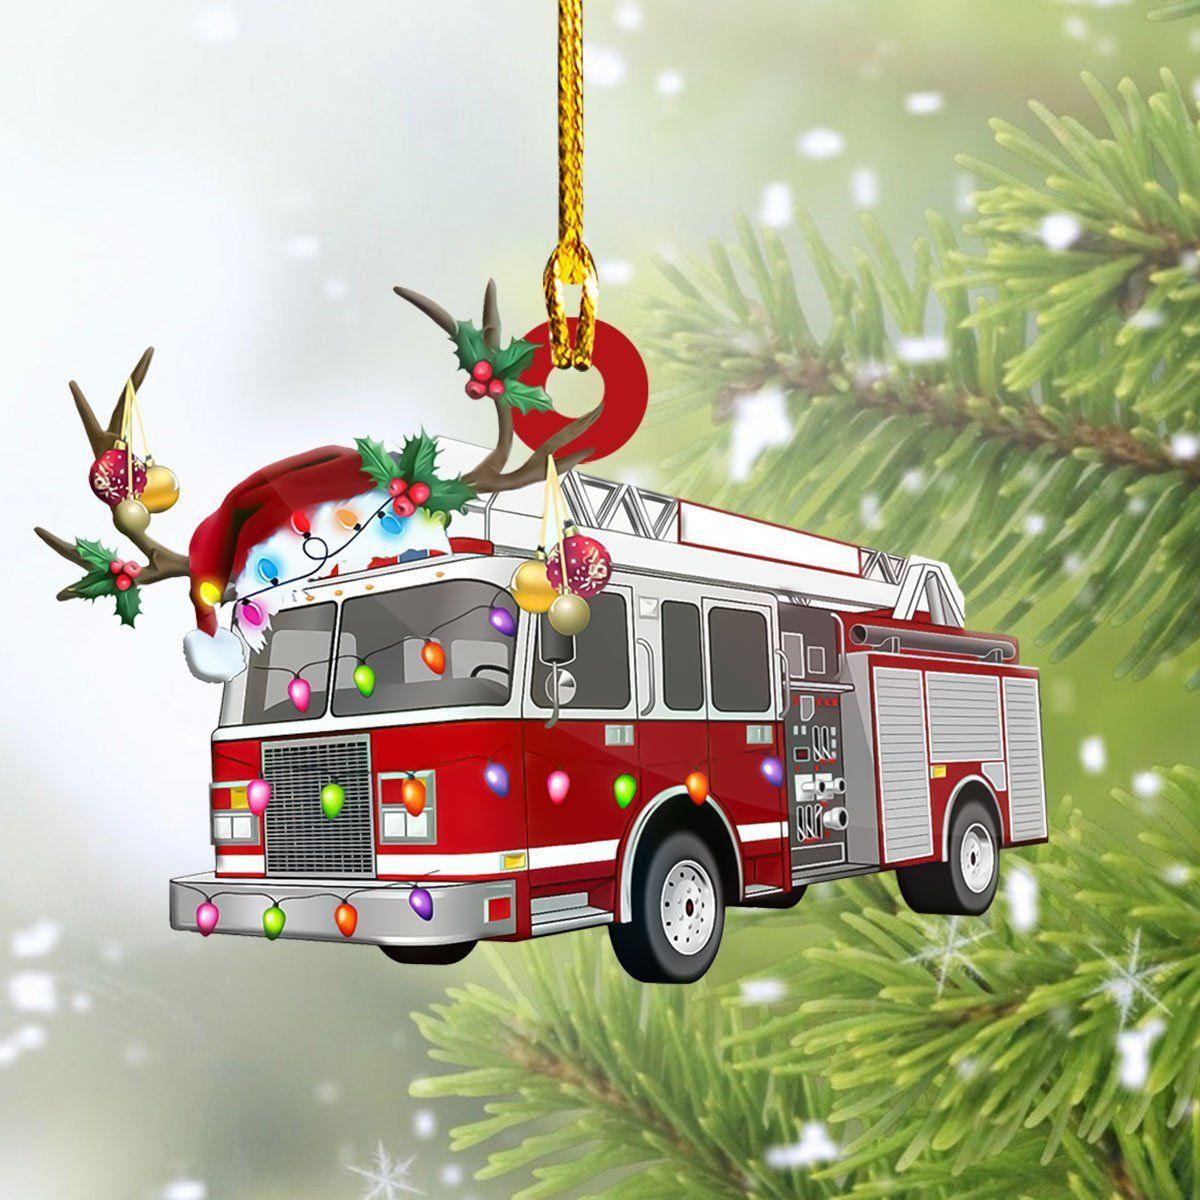 giftngon - Personalized Firefighter Truck Christmas Ornament | Custom Shaped Ornament New V1